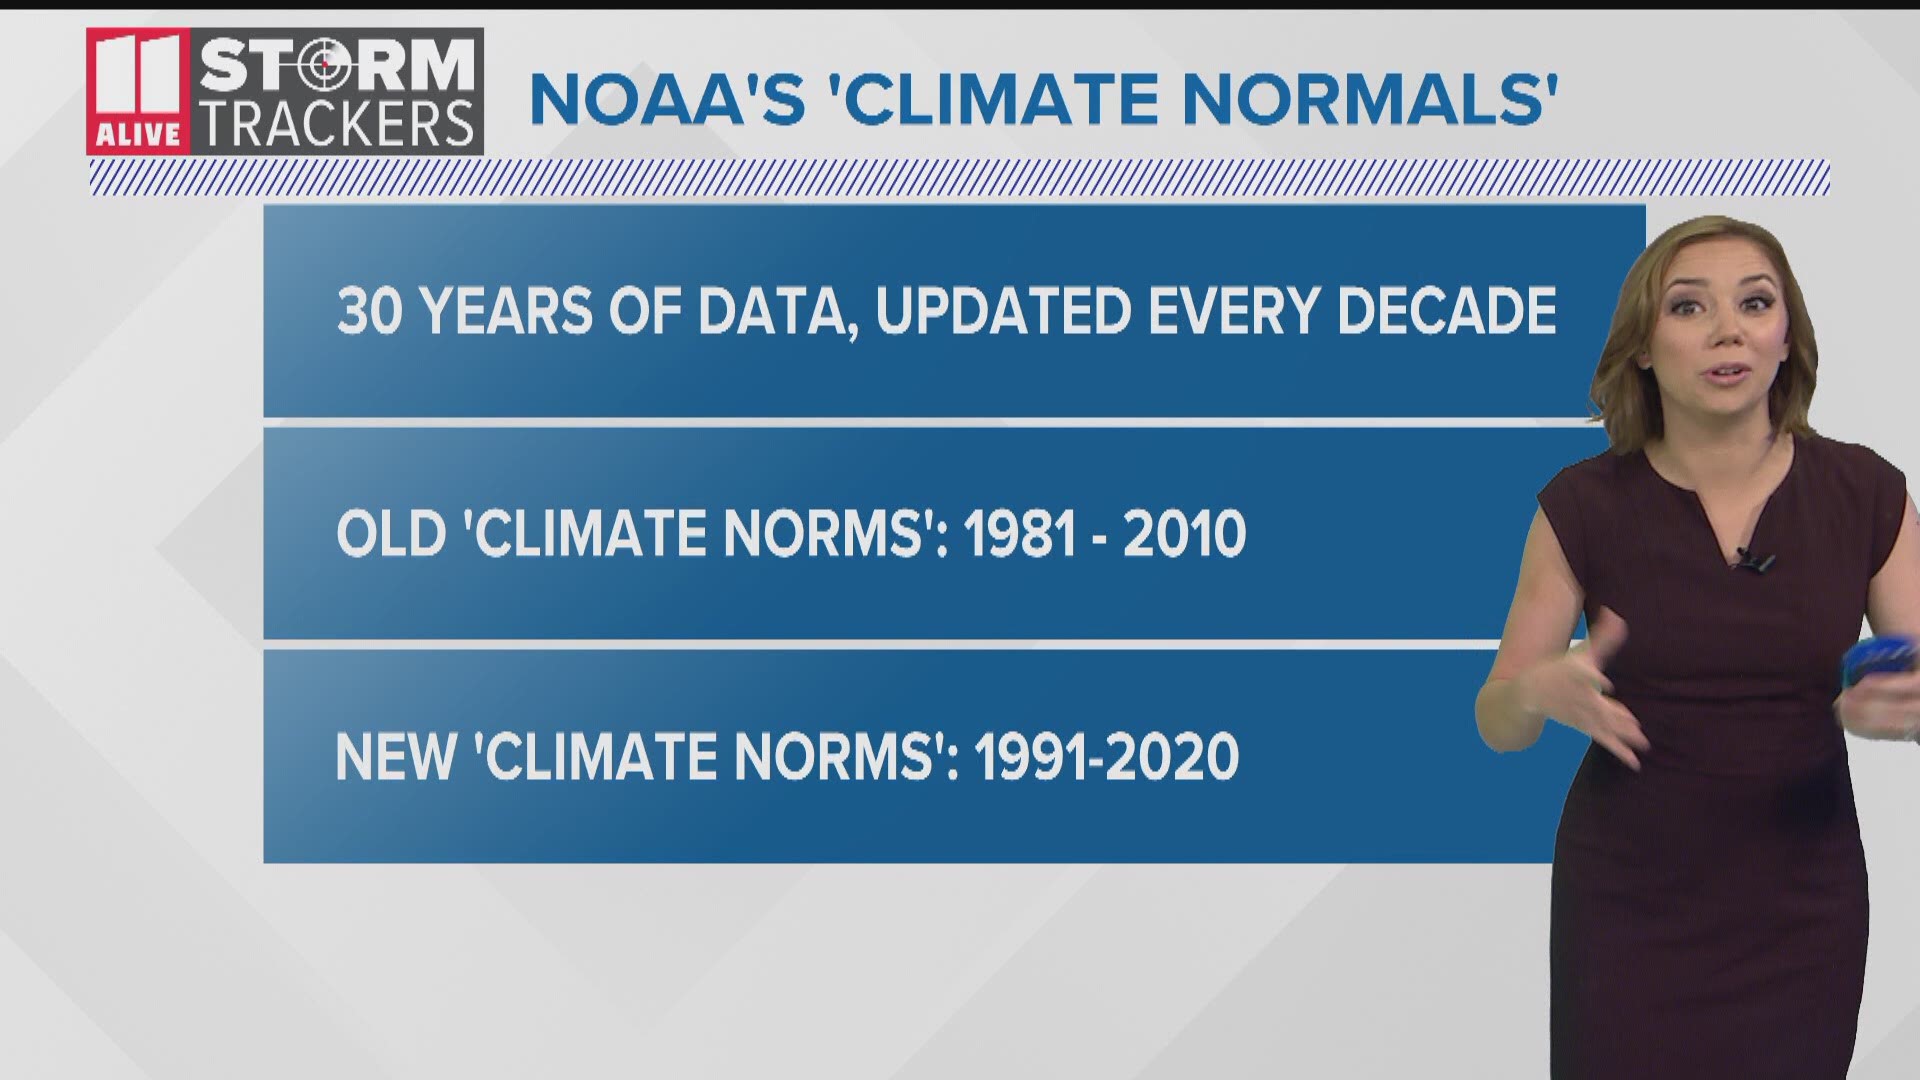 NOAA released it's updated 'Climate Normals' this week, showing a trend that warming is the new norm in the U.S. and for Atlanta